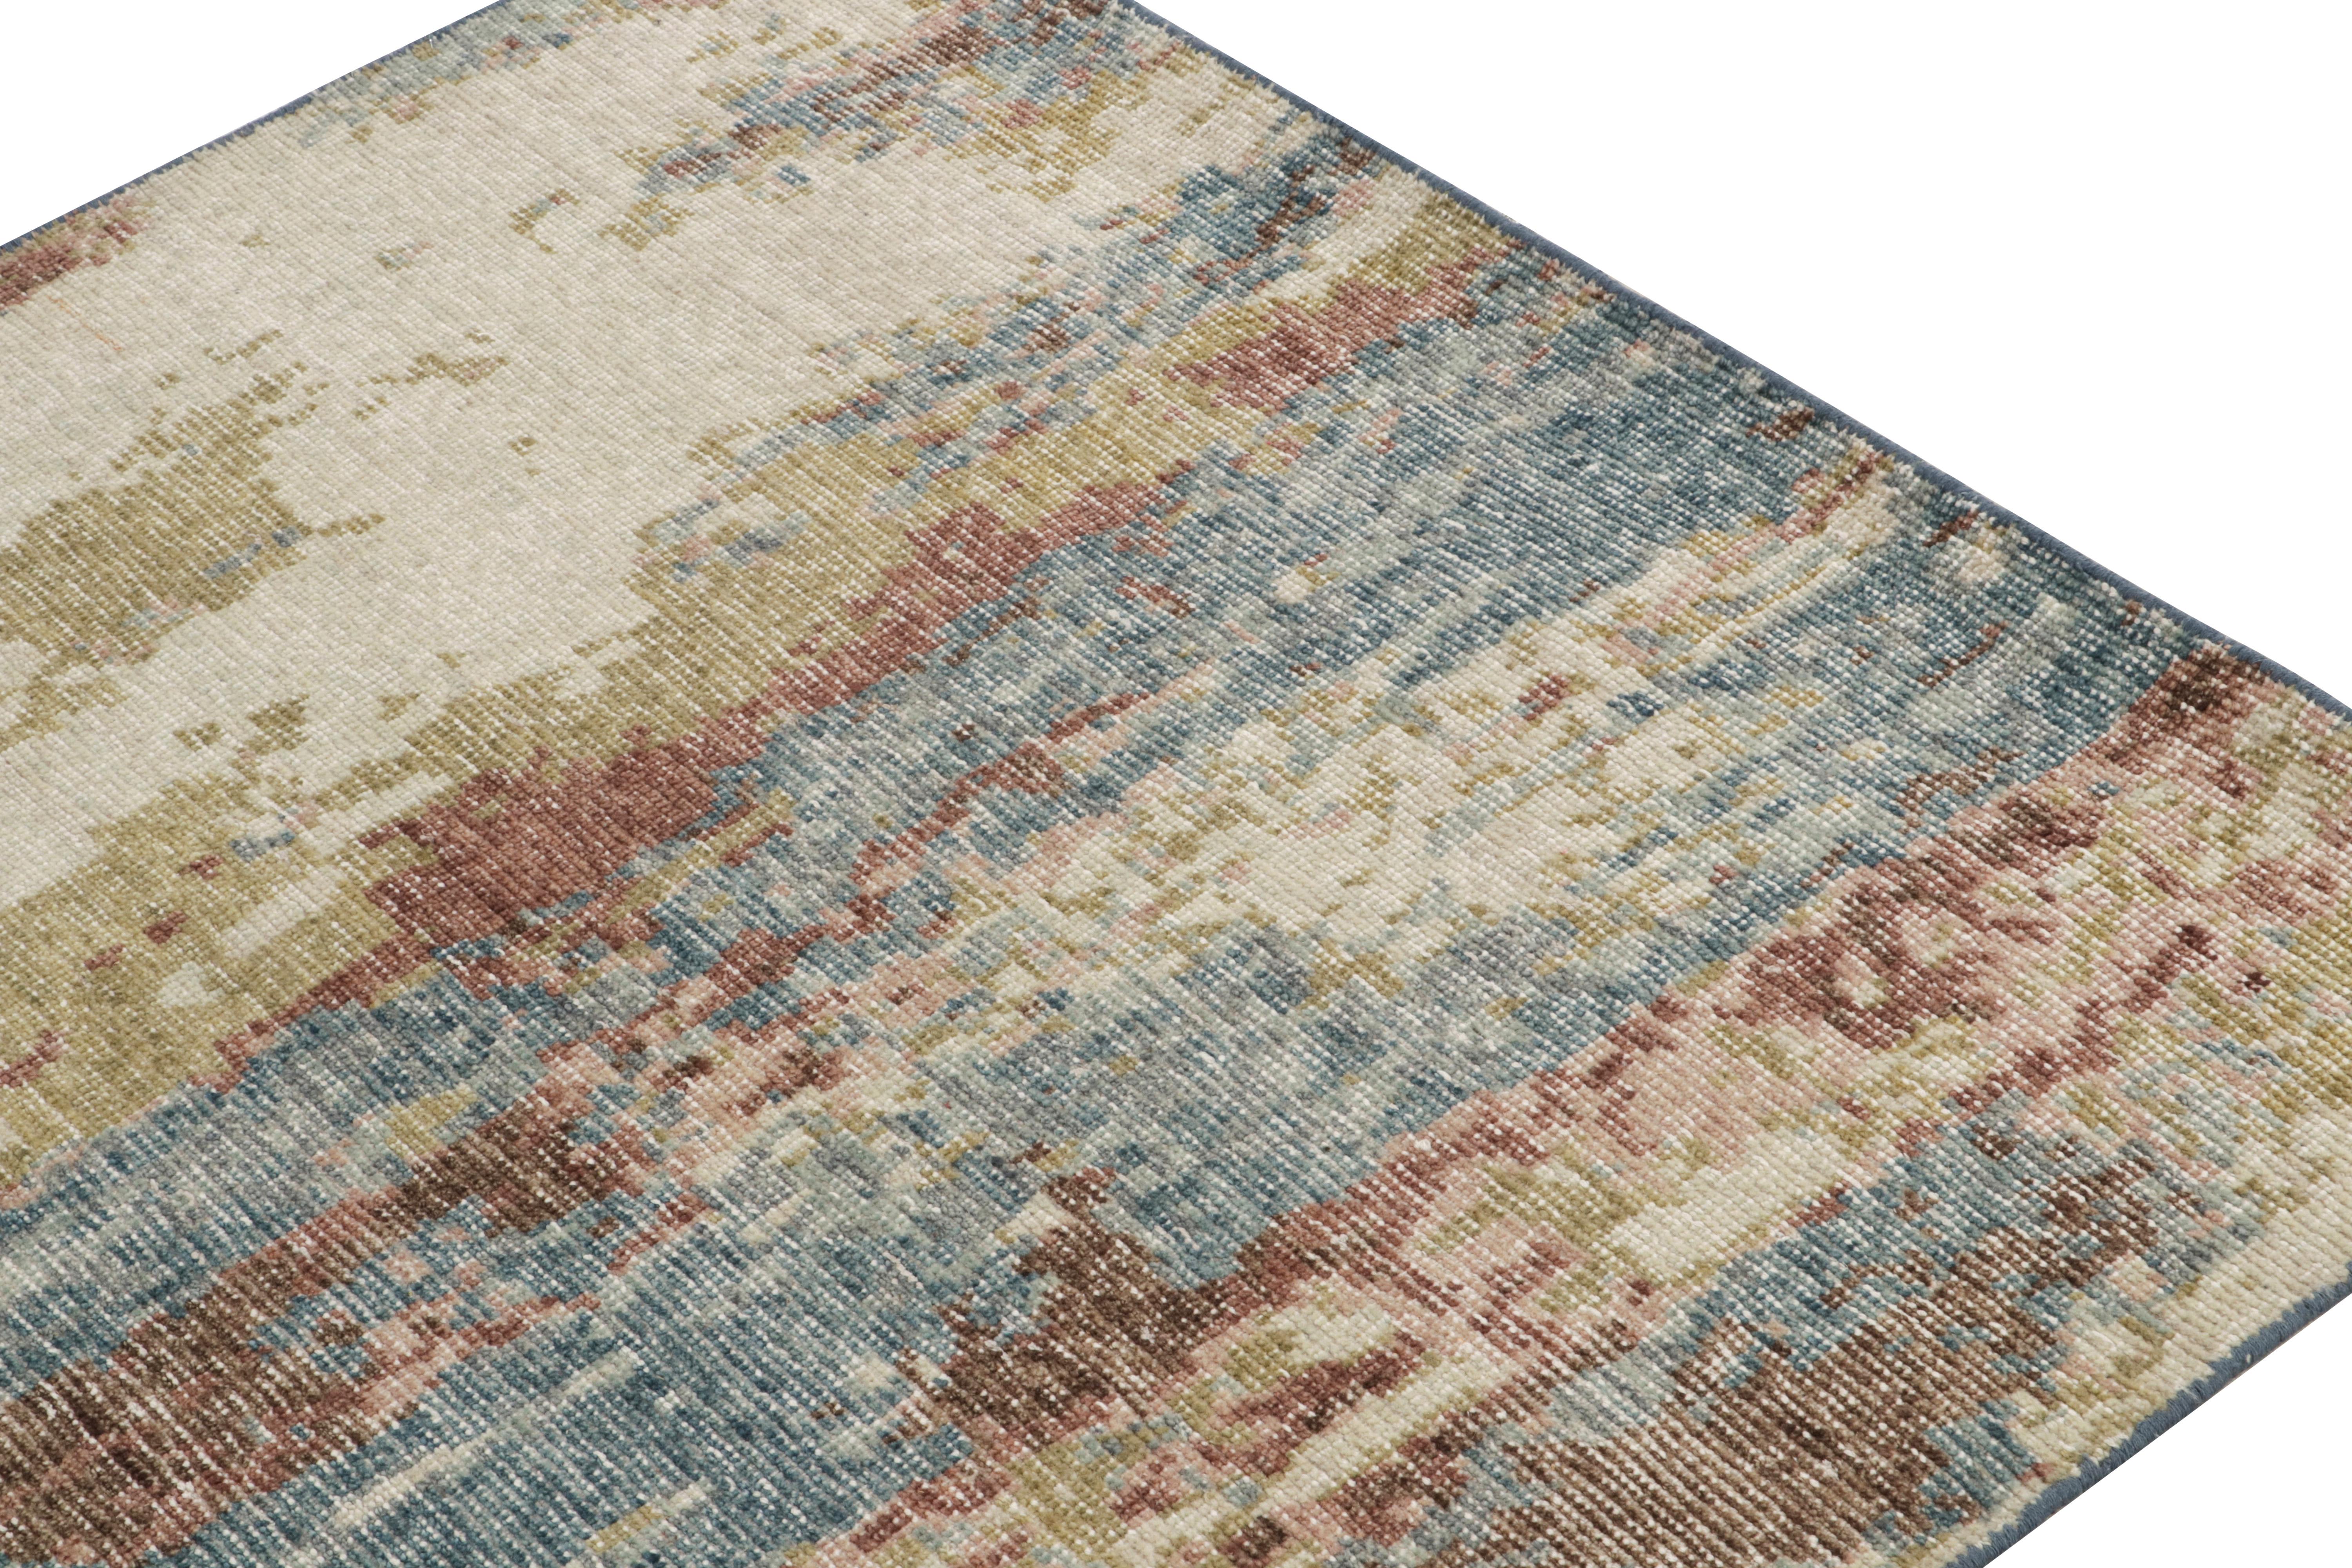 Indian Rug & Kilim's Distressed Style Abstract Rug in White, Blue, Beige-Brown Pattern For Sale